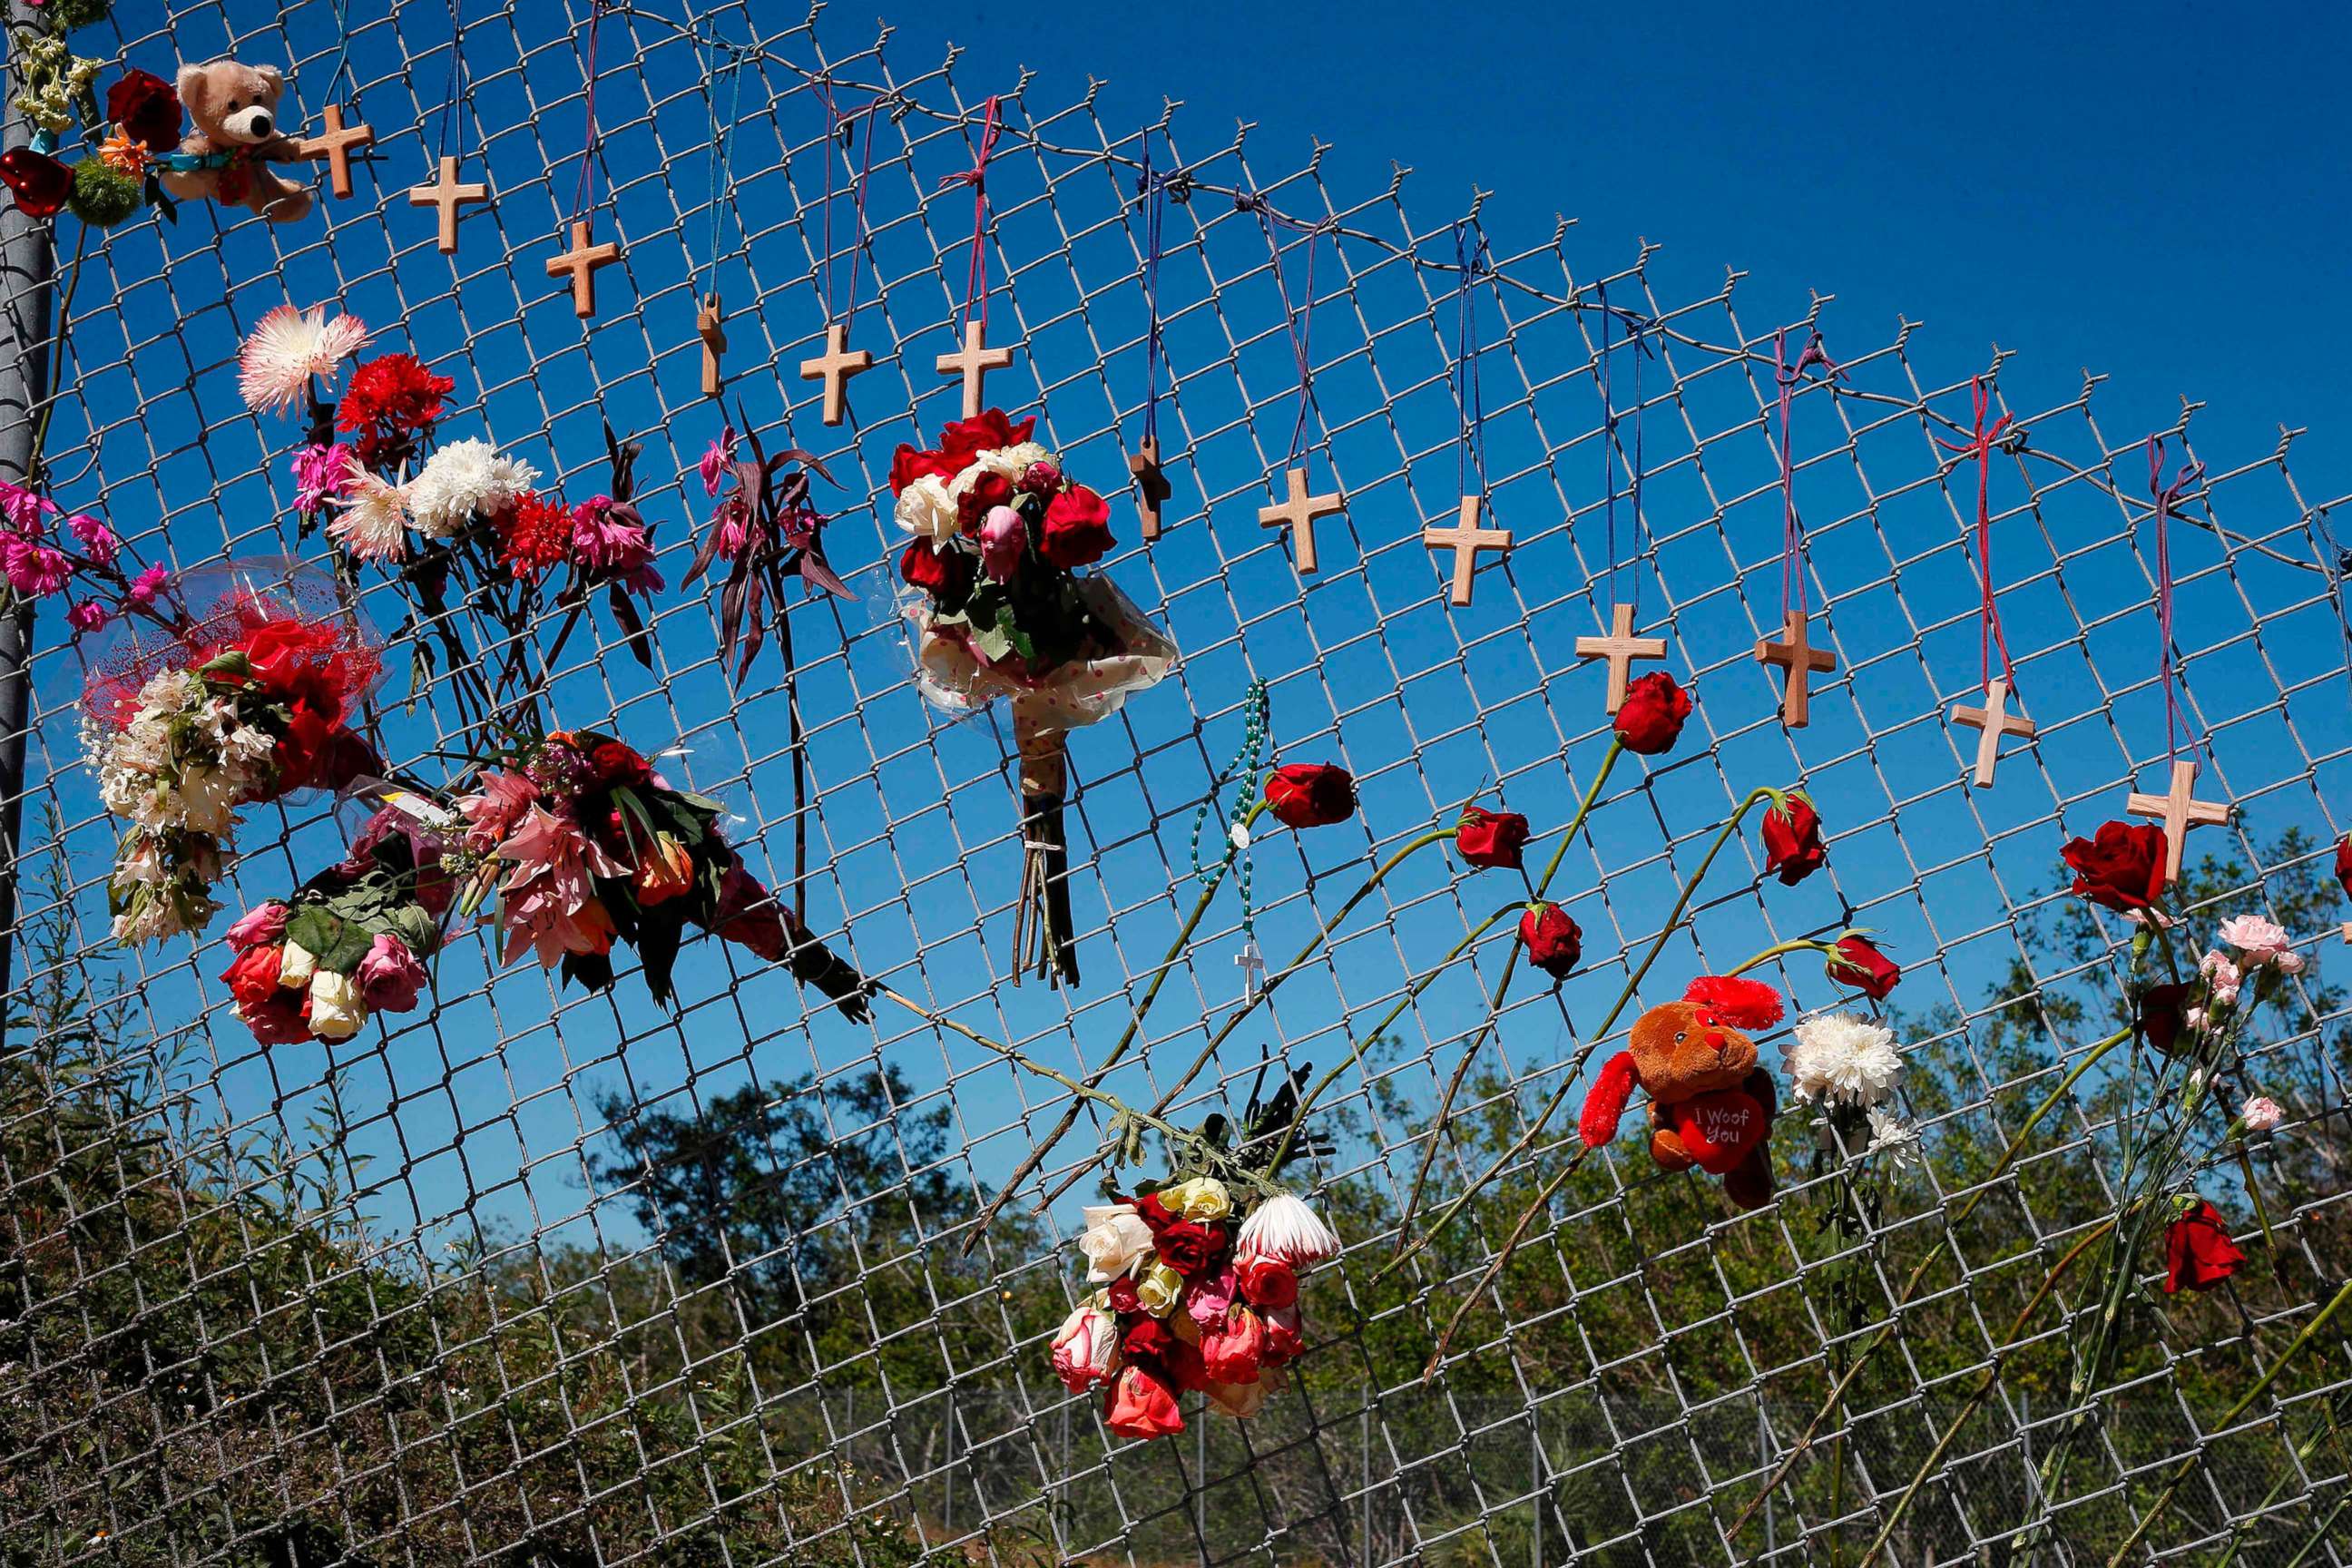 PHOTO: Flowers and crosses line a fence near the school on a makeshift memorial for the victims of the Marjory Stoneman Douglas High School shooting in Parkland, Fla., Feb. 16, 2018.